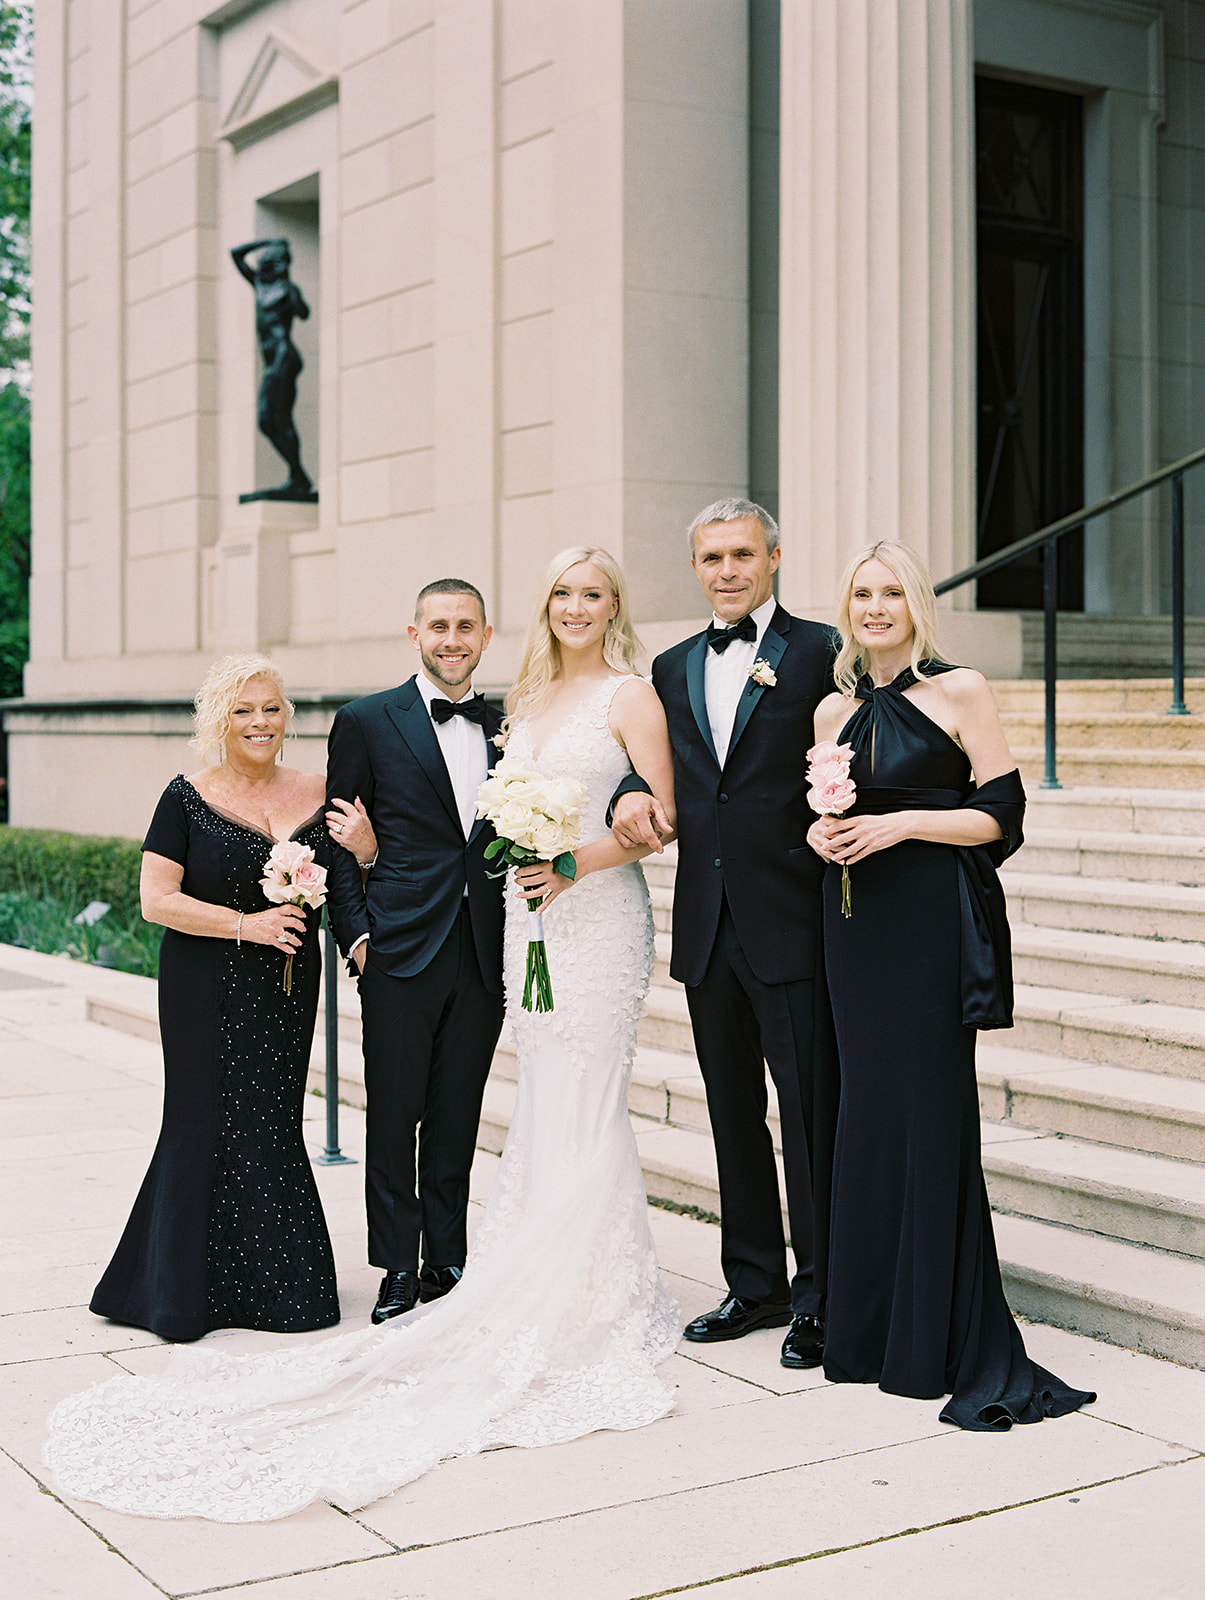 Family Portraits of a bride and groom and their parents wearing black